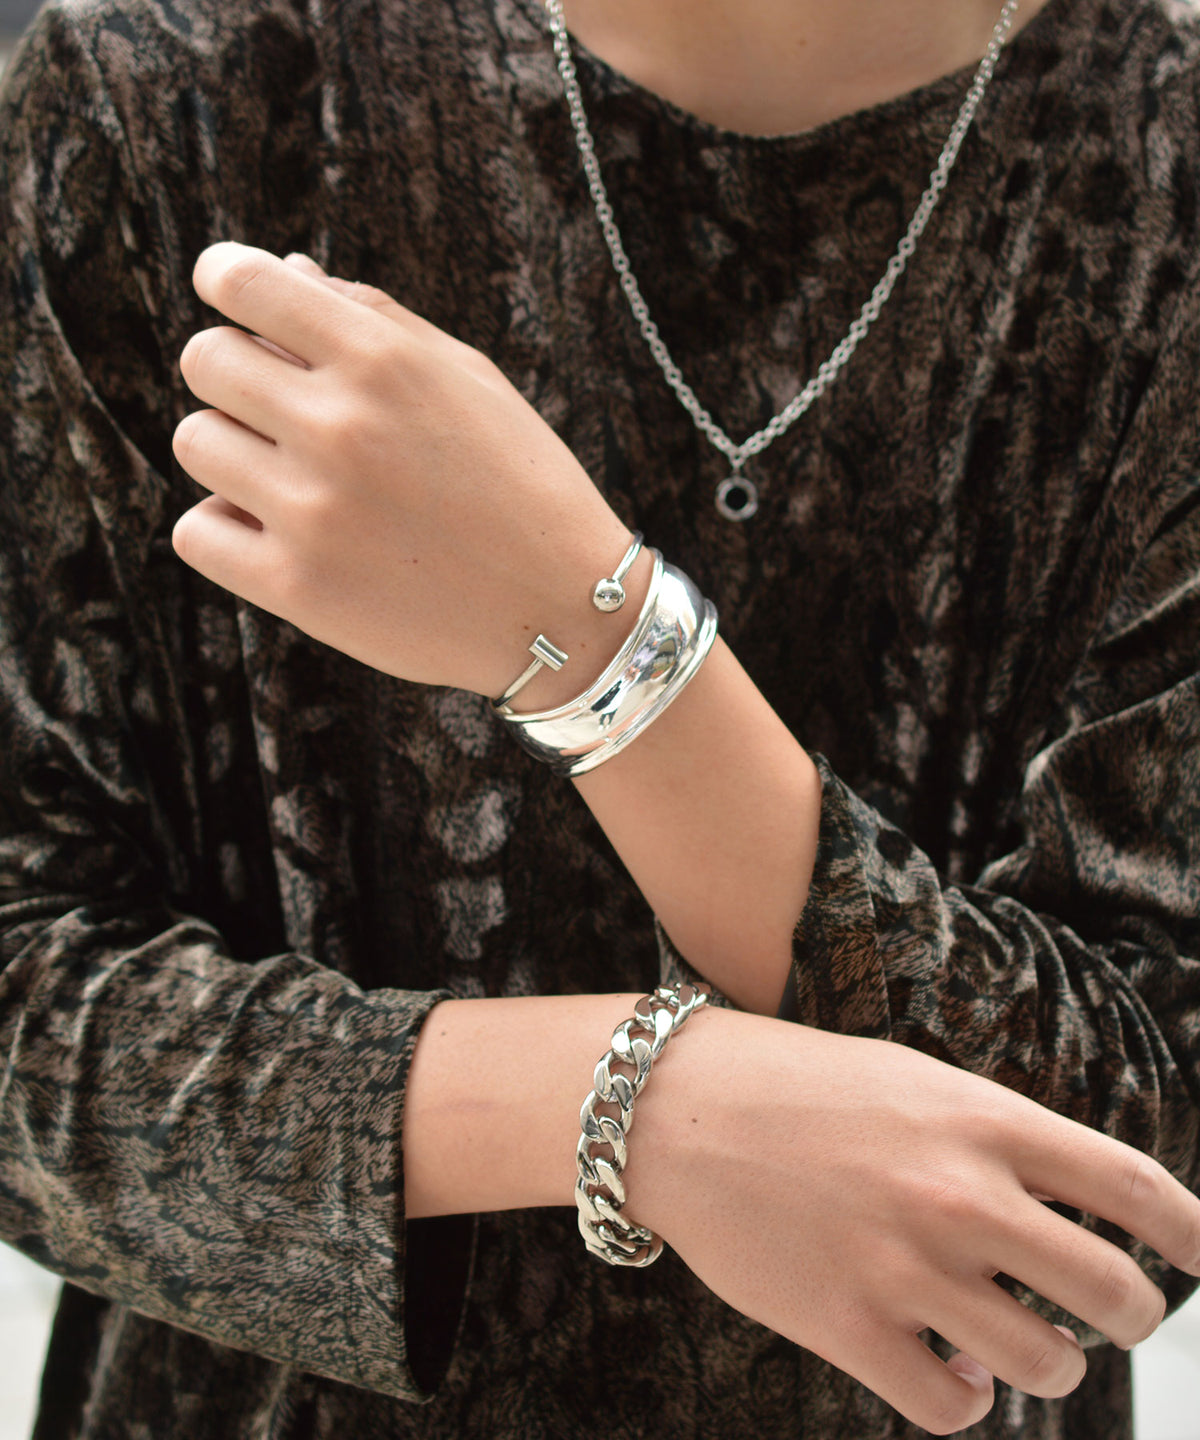 【Takeru. for BROTHERHOOD】Ball & T-Bar Bangle "Surgical Stainless Steel 316L"-Stainless SILVER